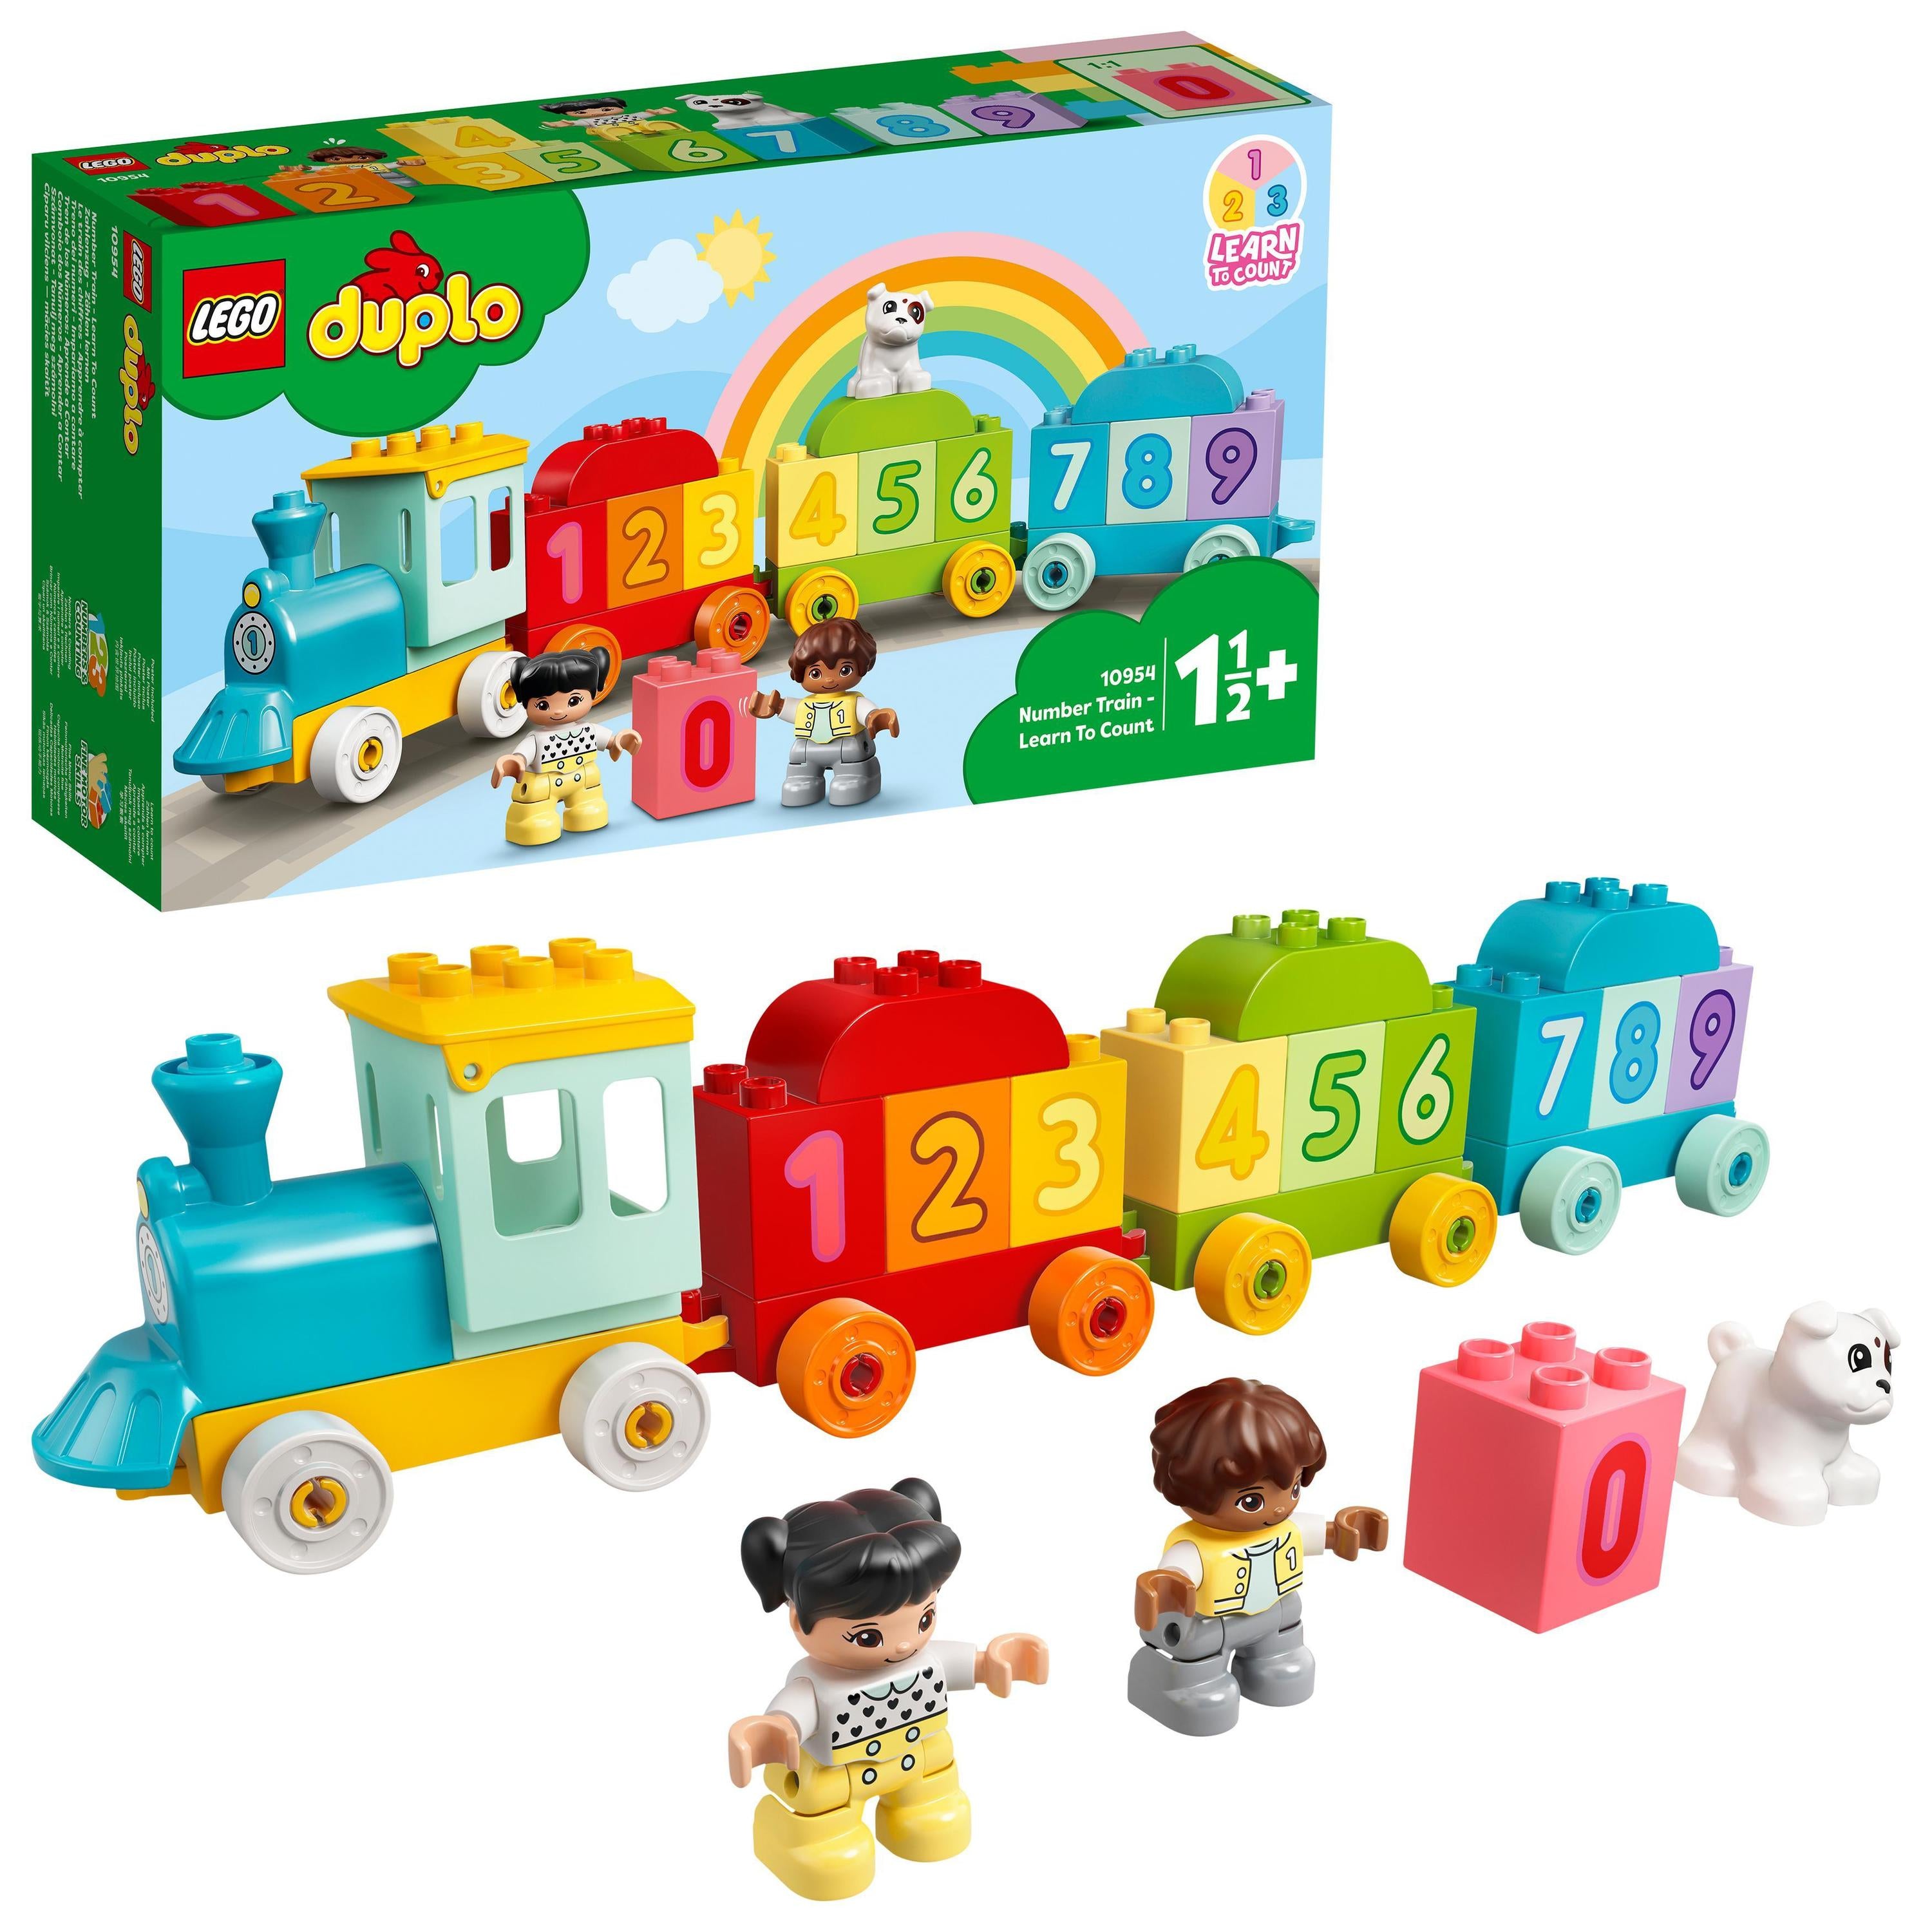 LEGO® DUPLO® My First Number Train – Learn to Count | 10954